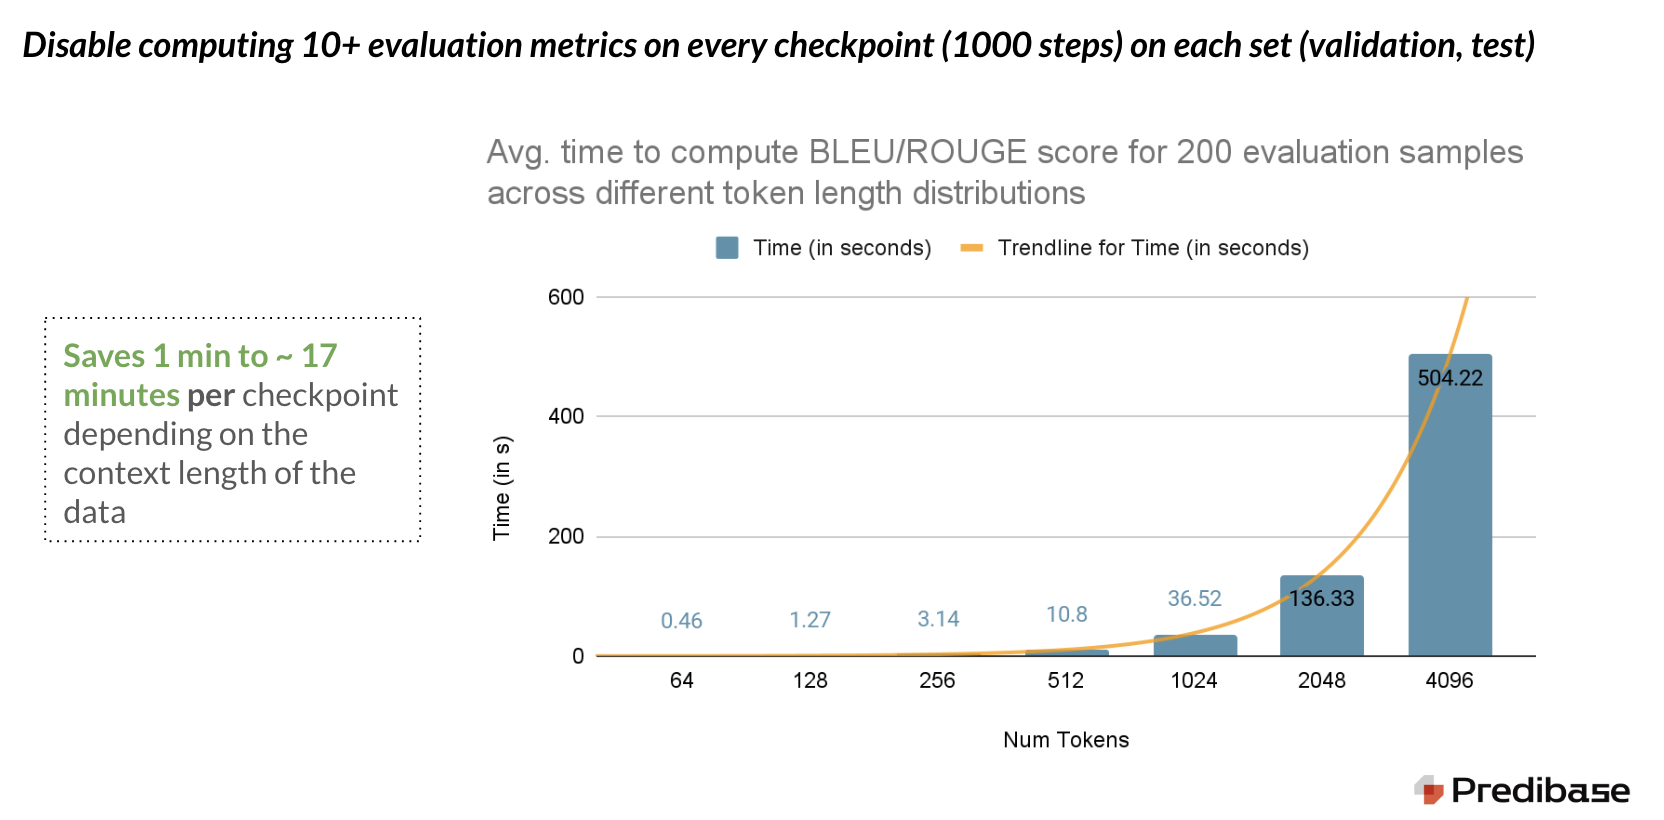 Disable computing 10+ evaluation metrics on every checkpoint (1000 steps) on each set (validation, test).